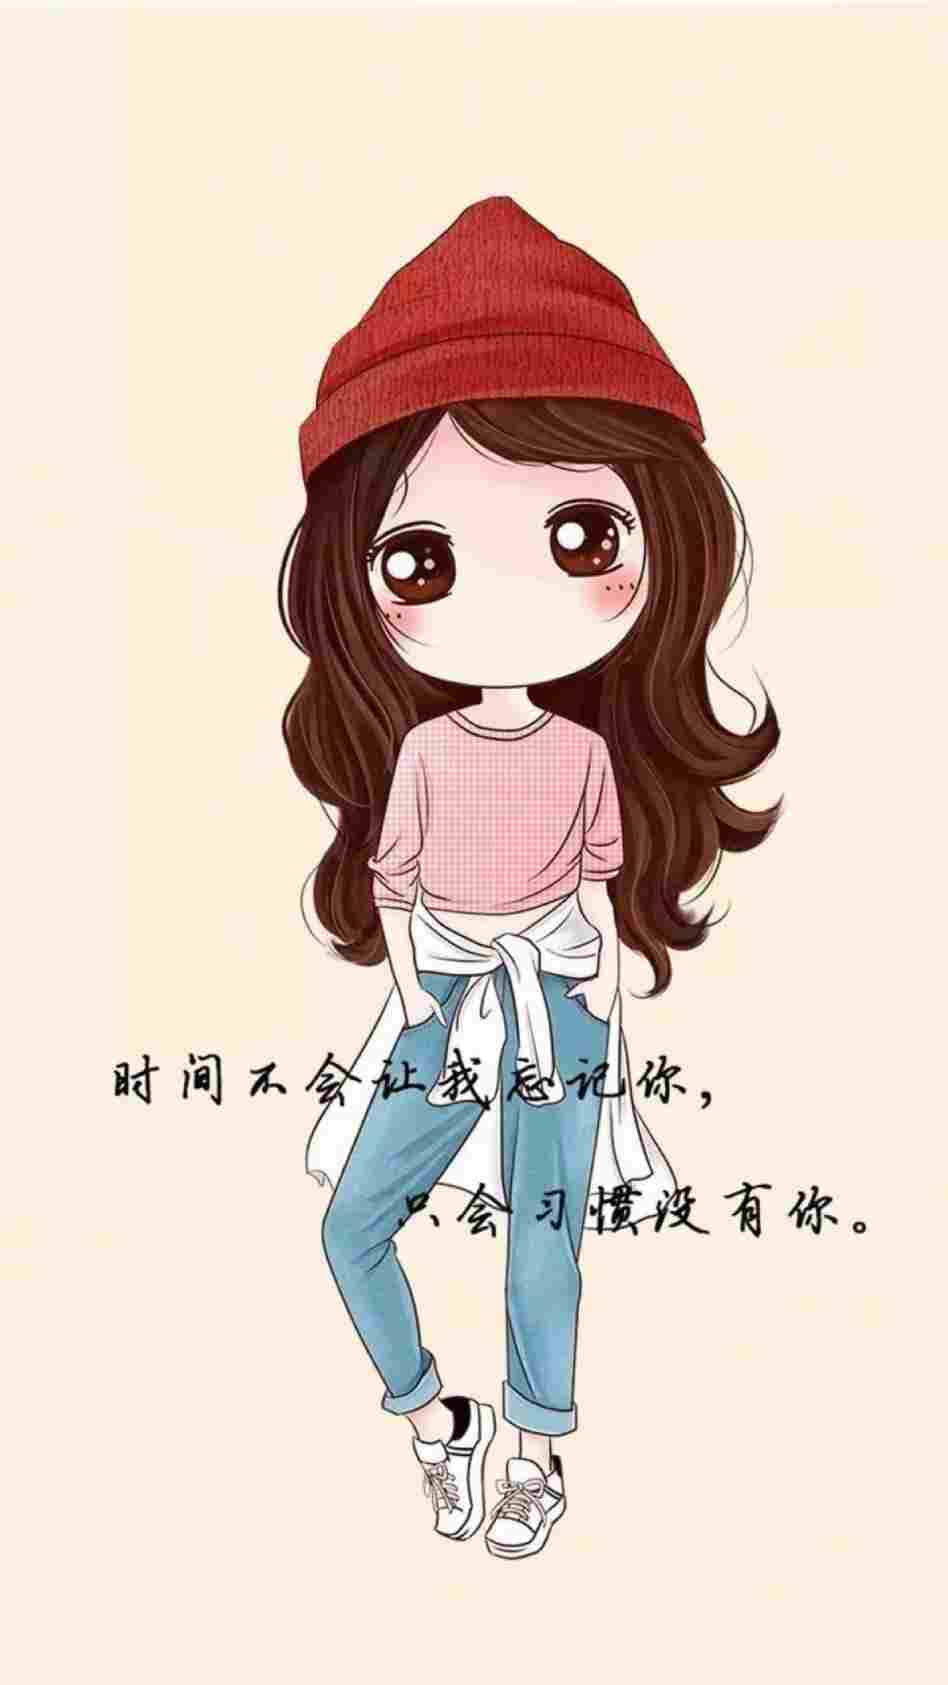 Korean Anime Girl In Casual Outfit Wallpaper